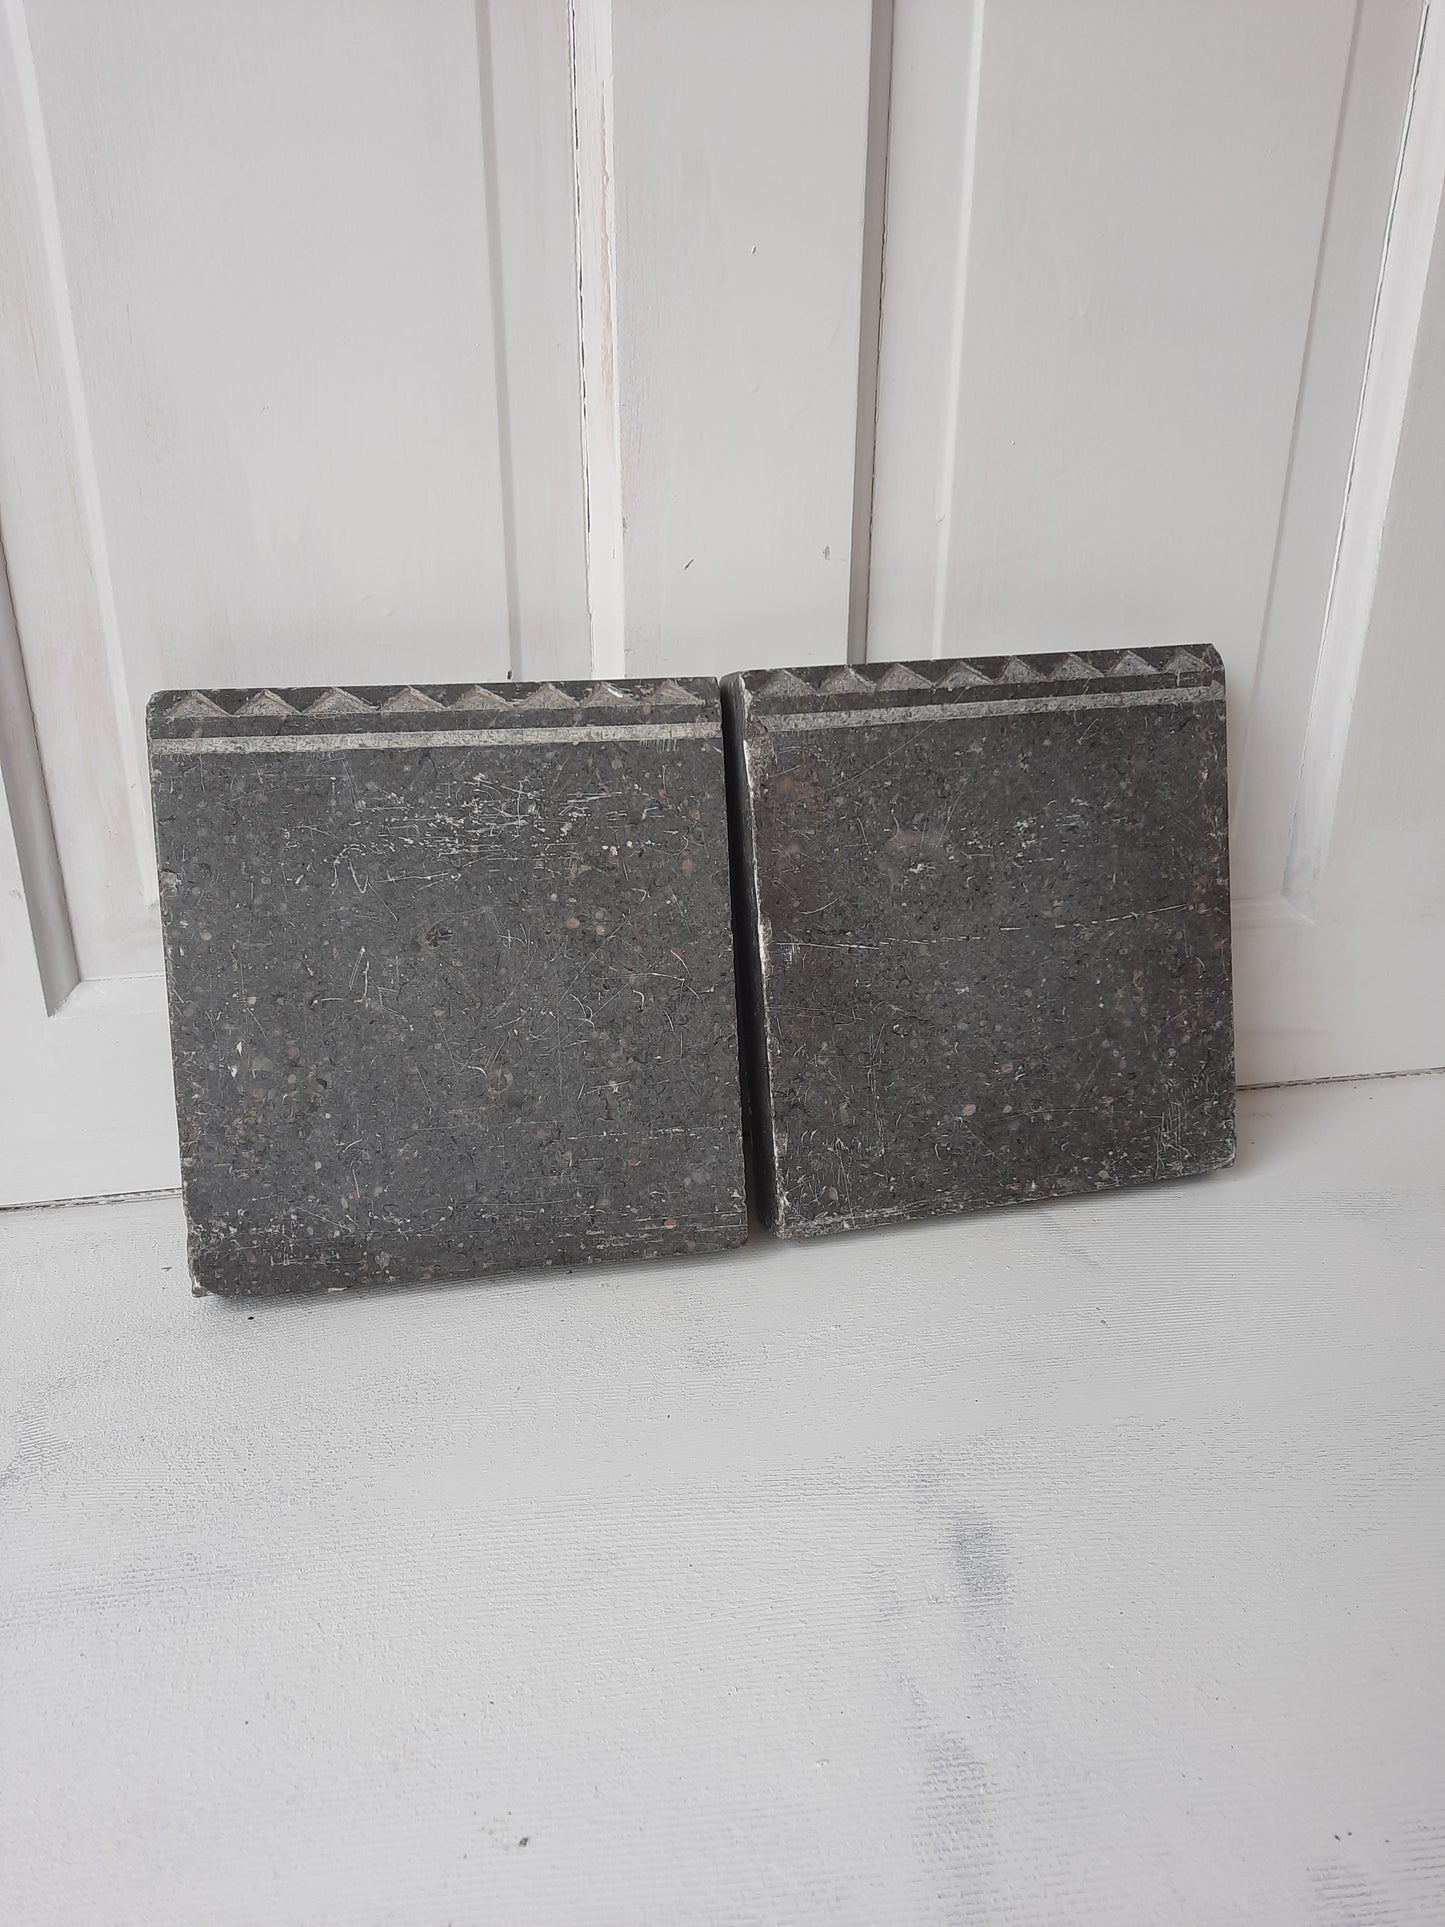 Two Gray Etched Granite Plinth Blocks, Antique Carved Marble or Granite Rosettes or Plinths